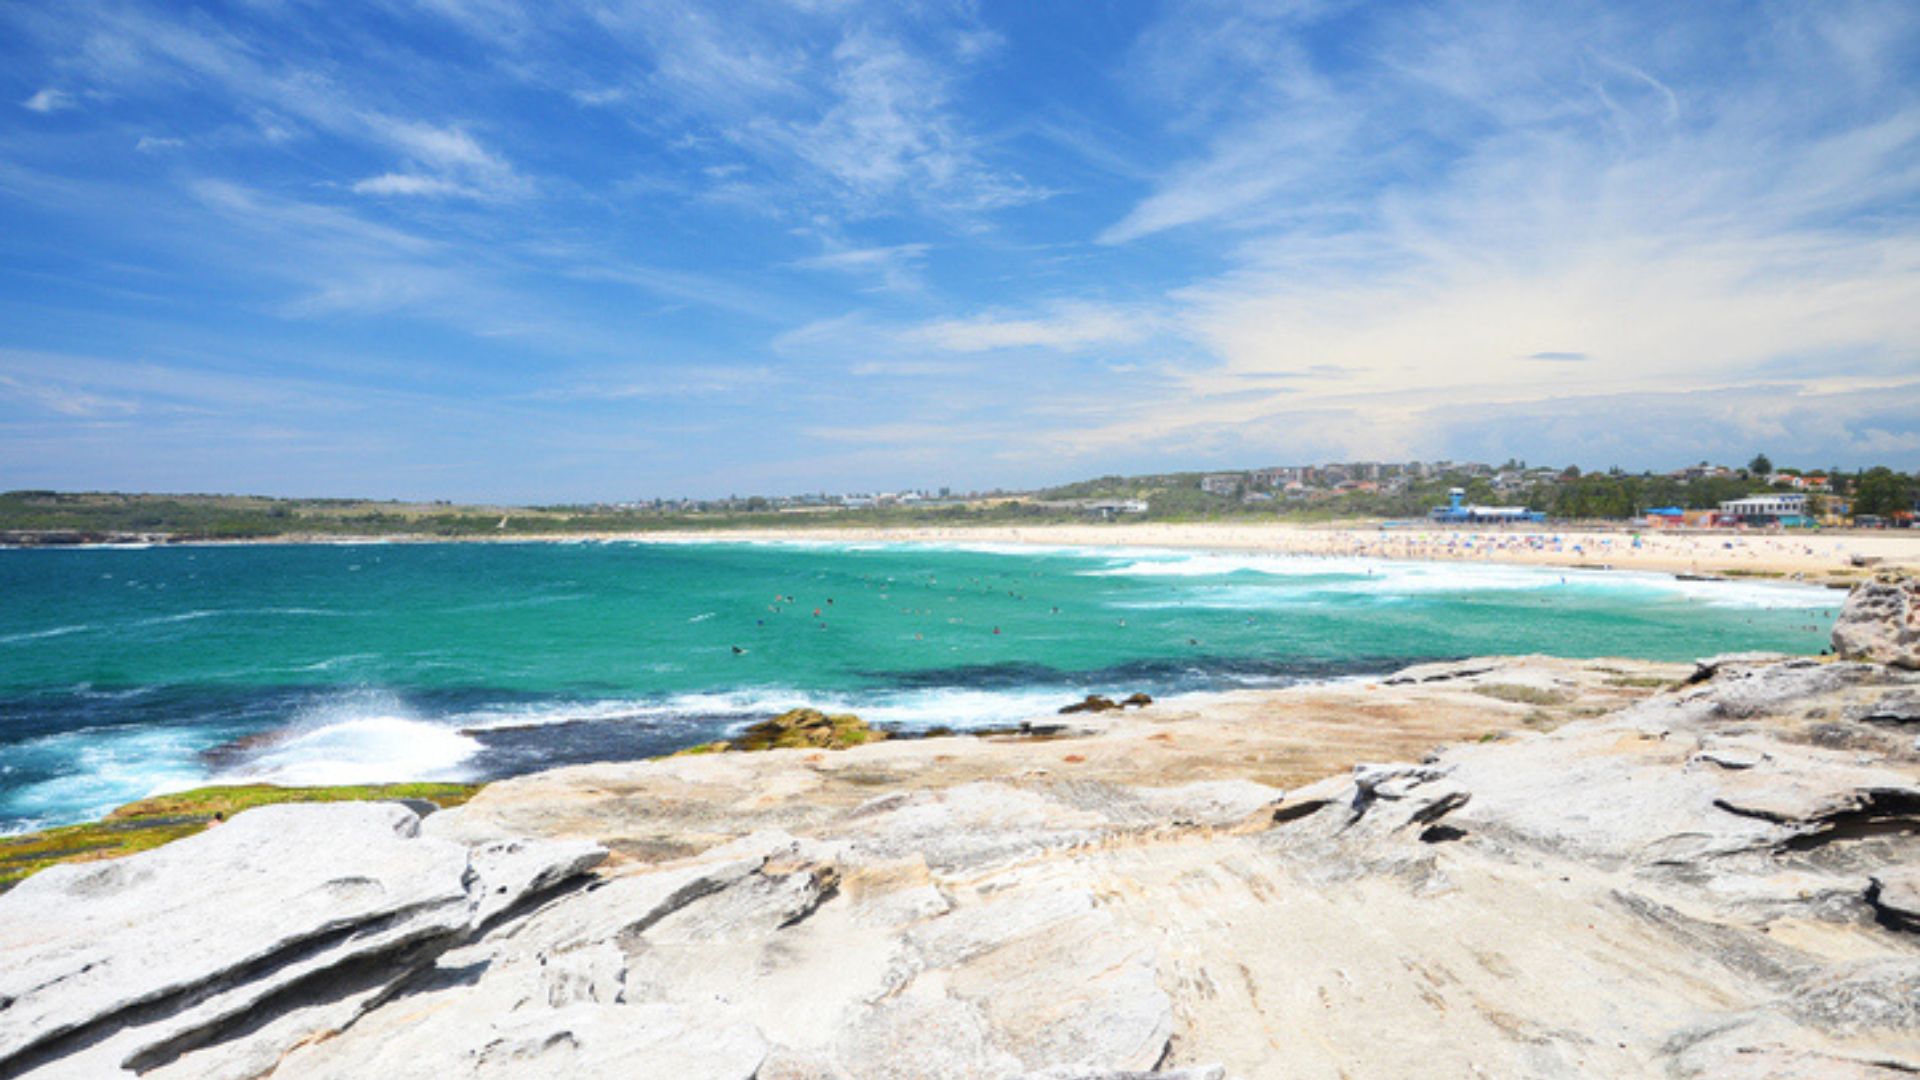 Maroubra Beach is perfect for beginner surfing